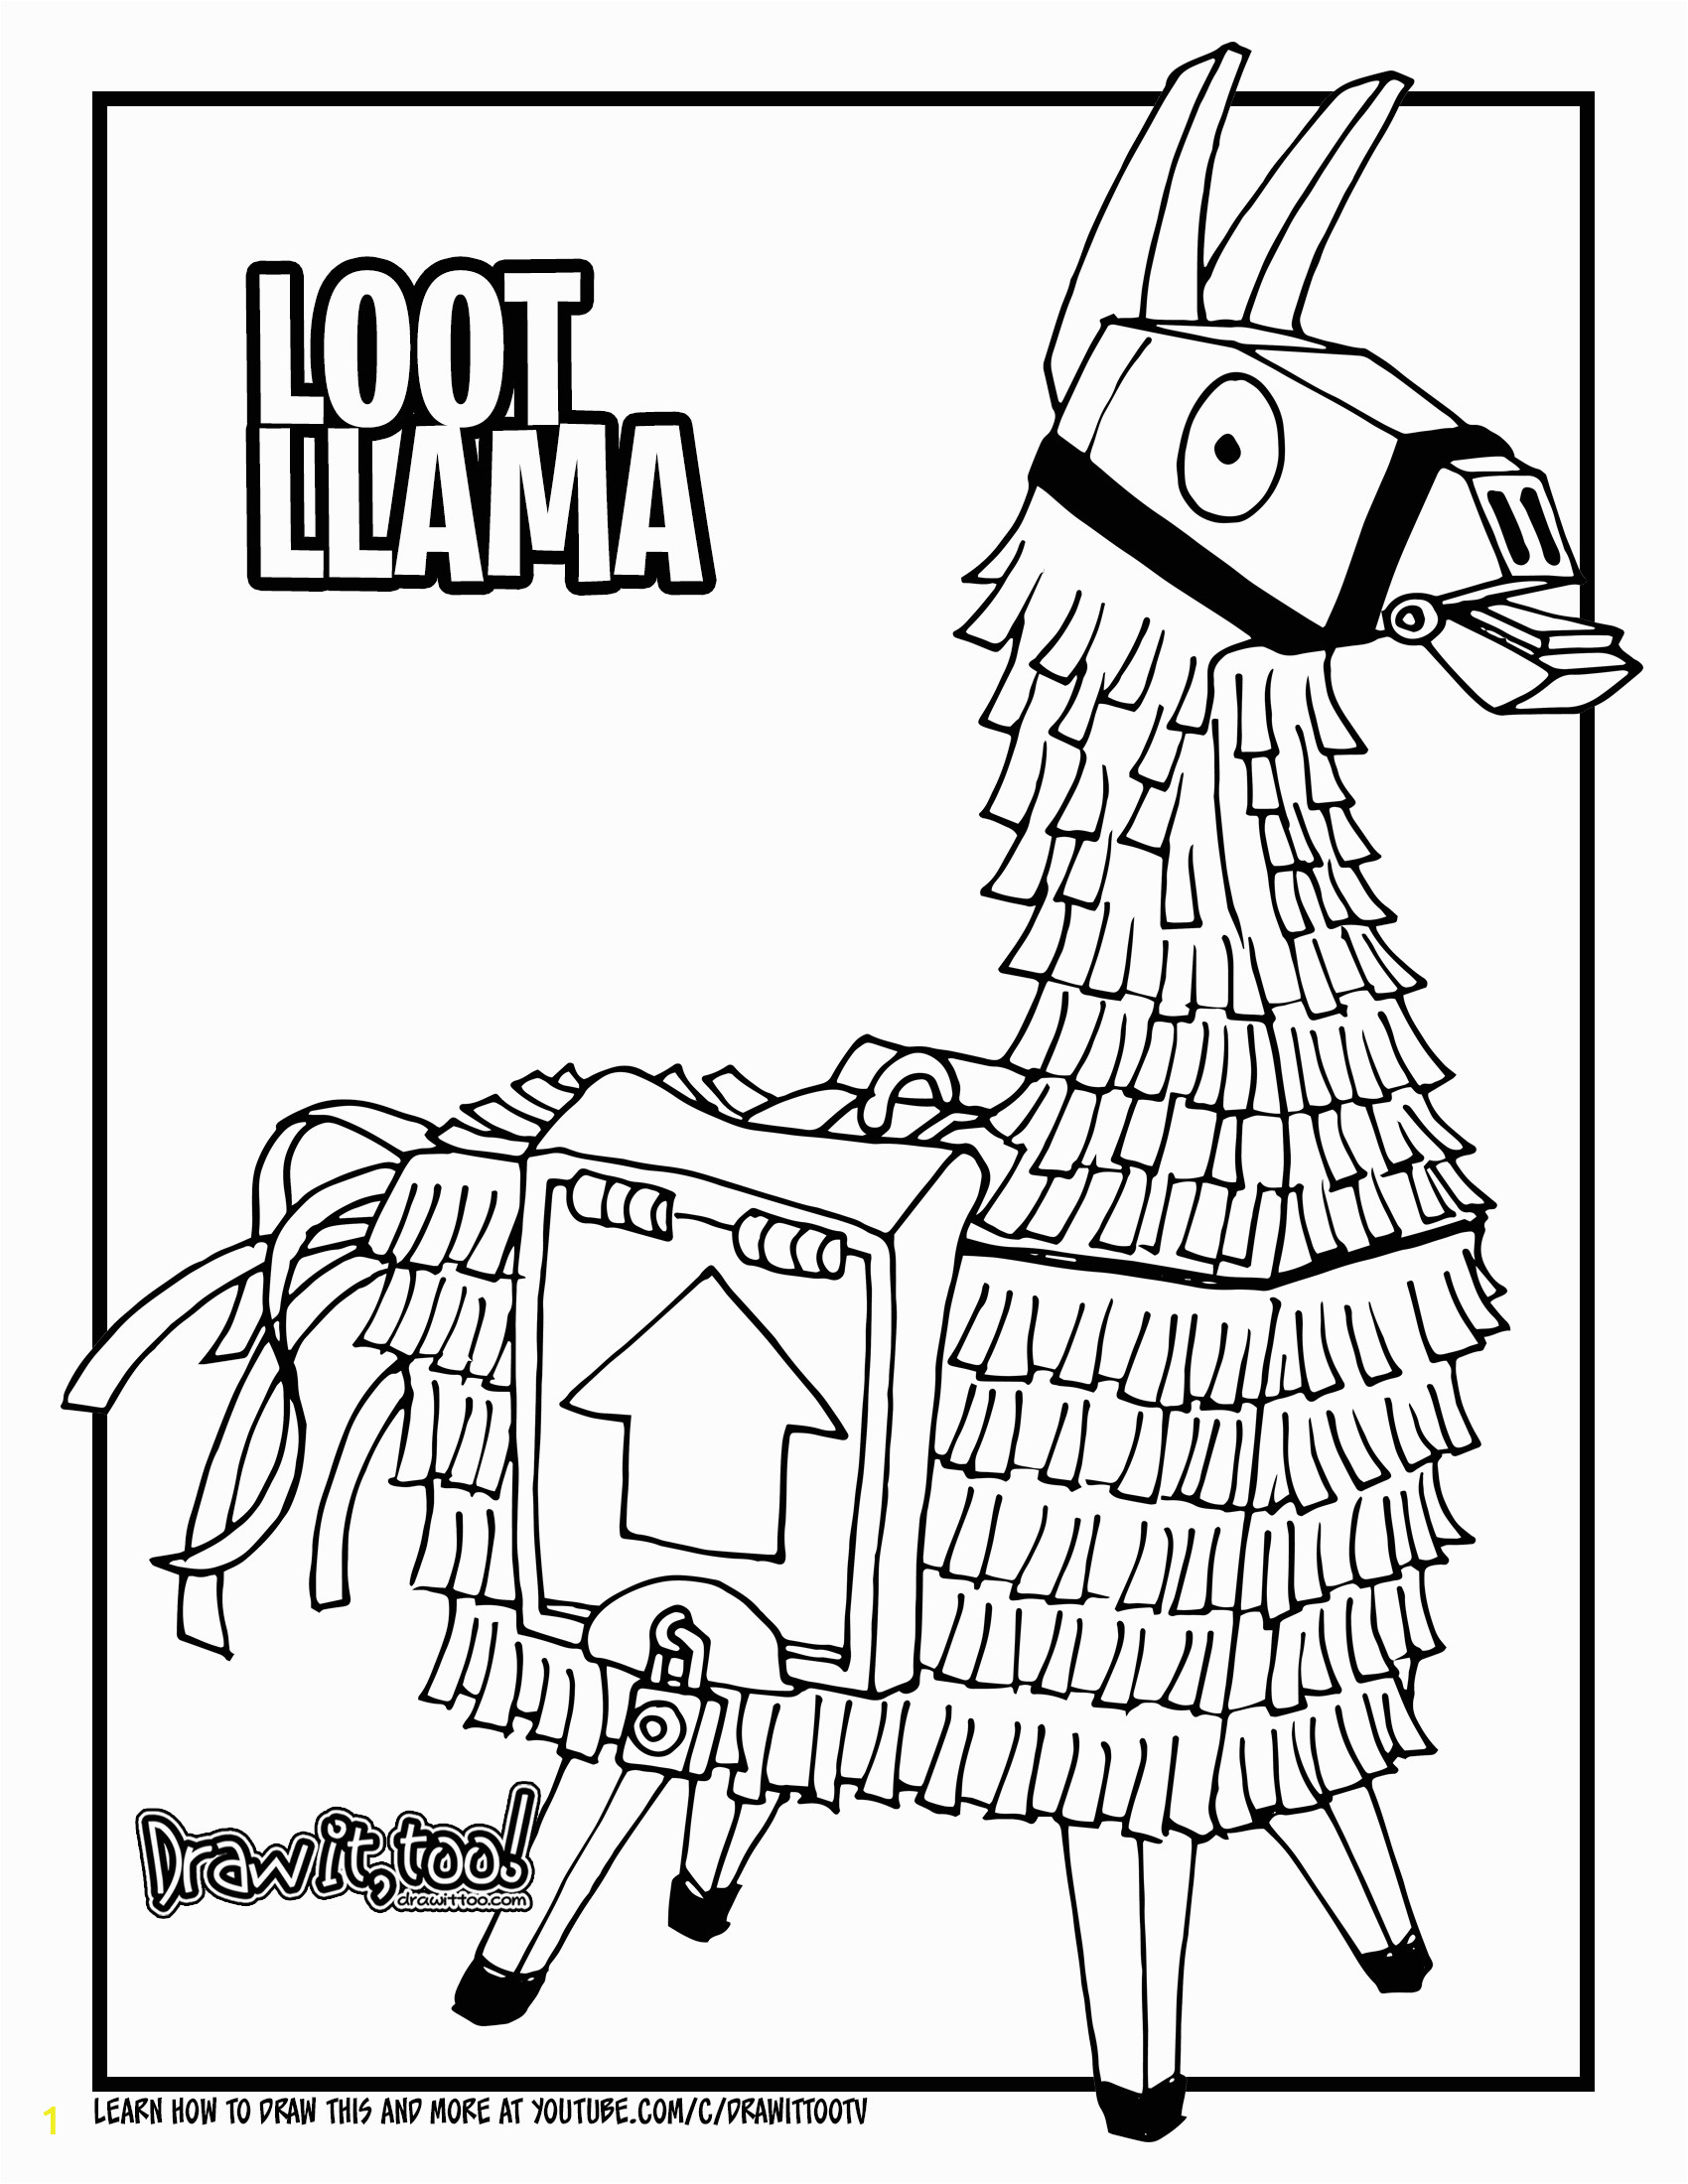 how to draw the loot llama fortnite battle royale drawing tutorial